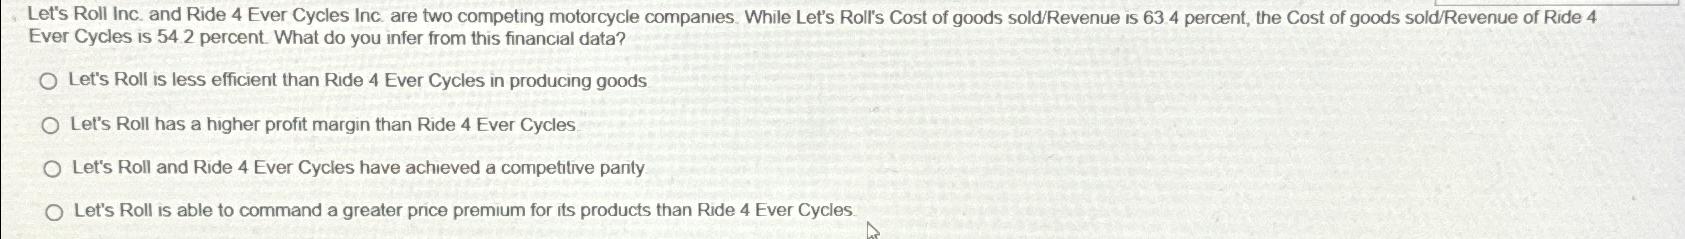 Let's Roll Inc. and Ride 4 Ever Cycles Inc. are two competing motorcycle companies. While Let's Roll's Cost